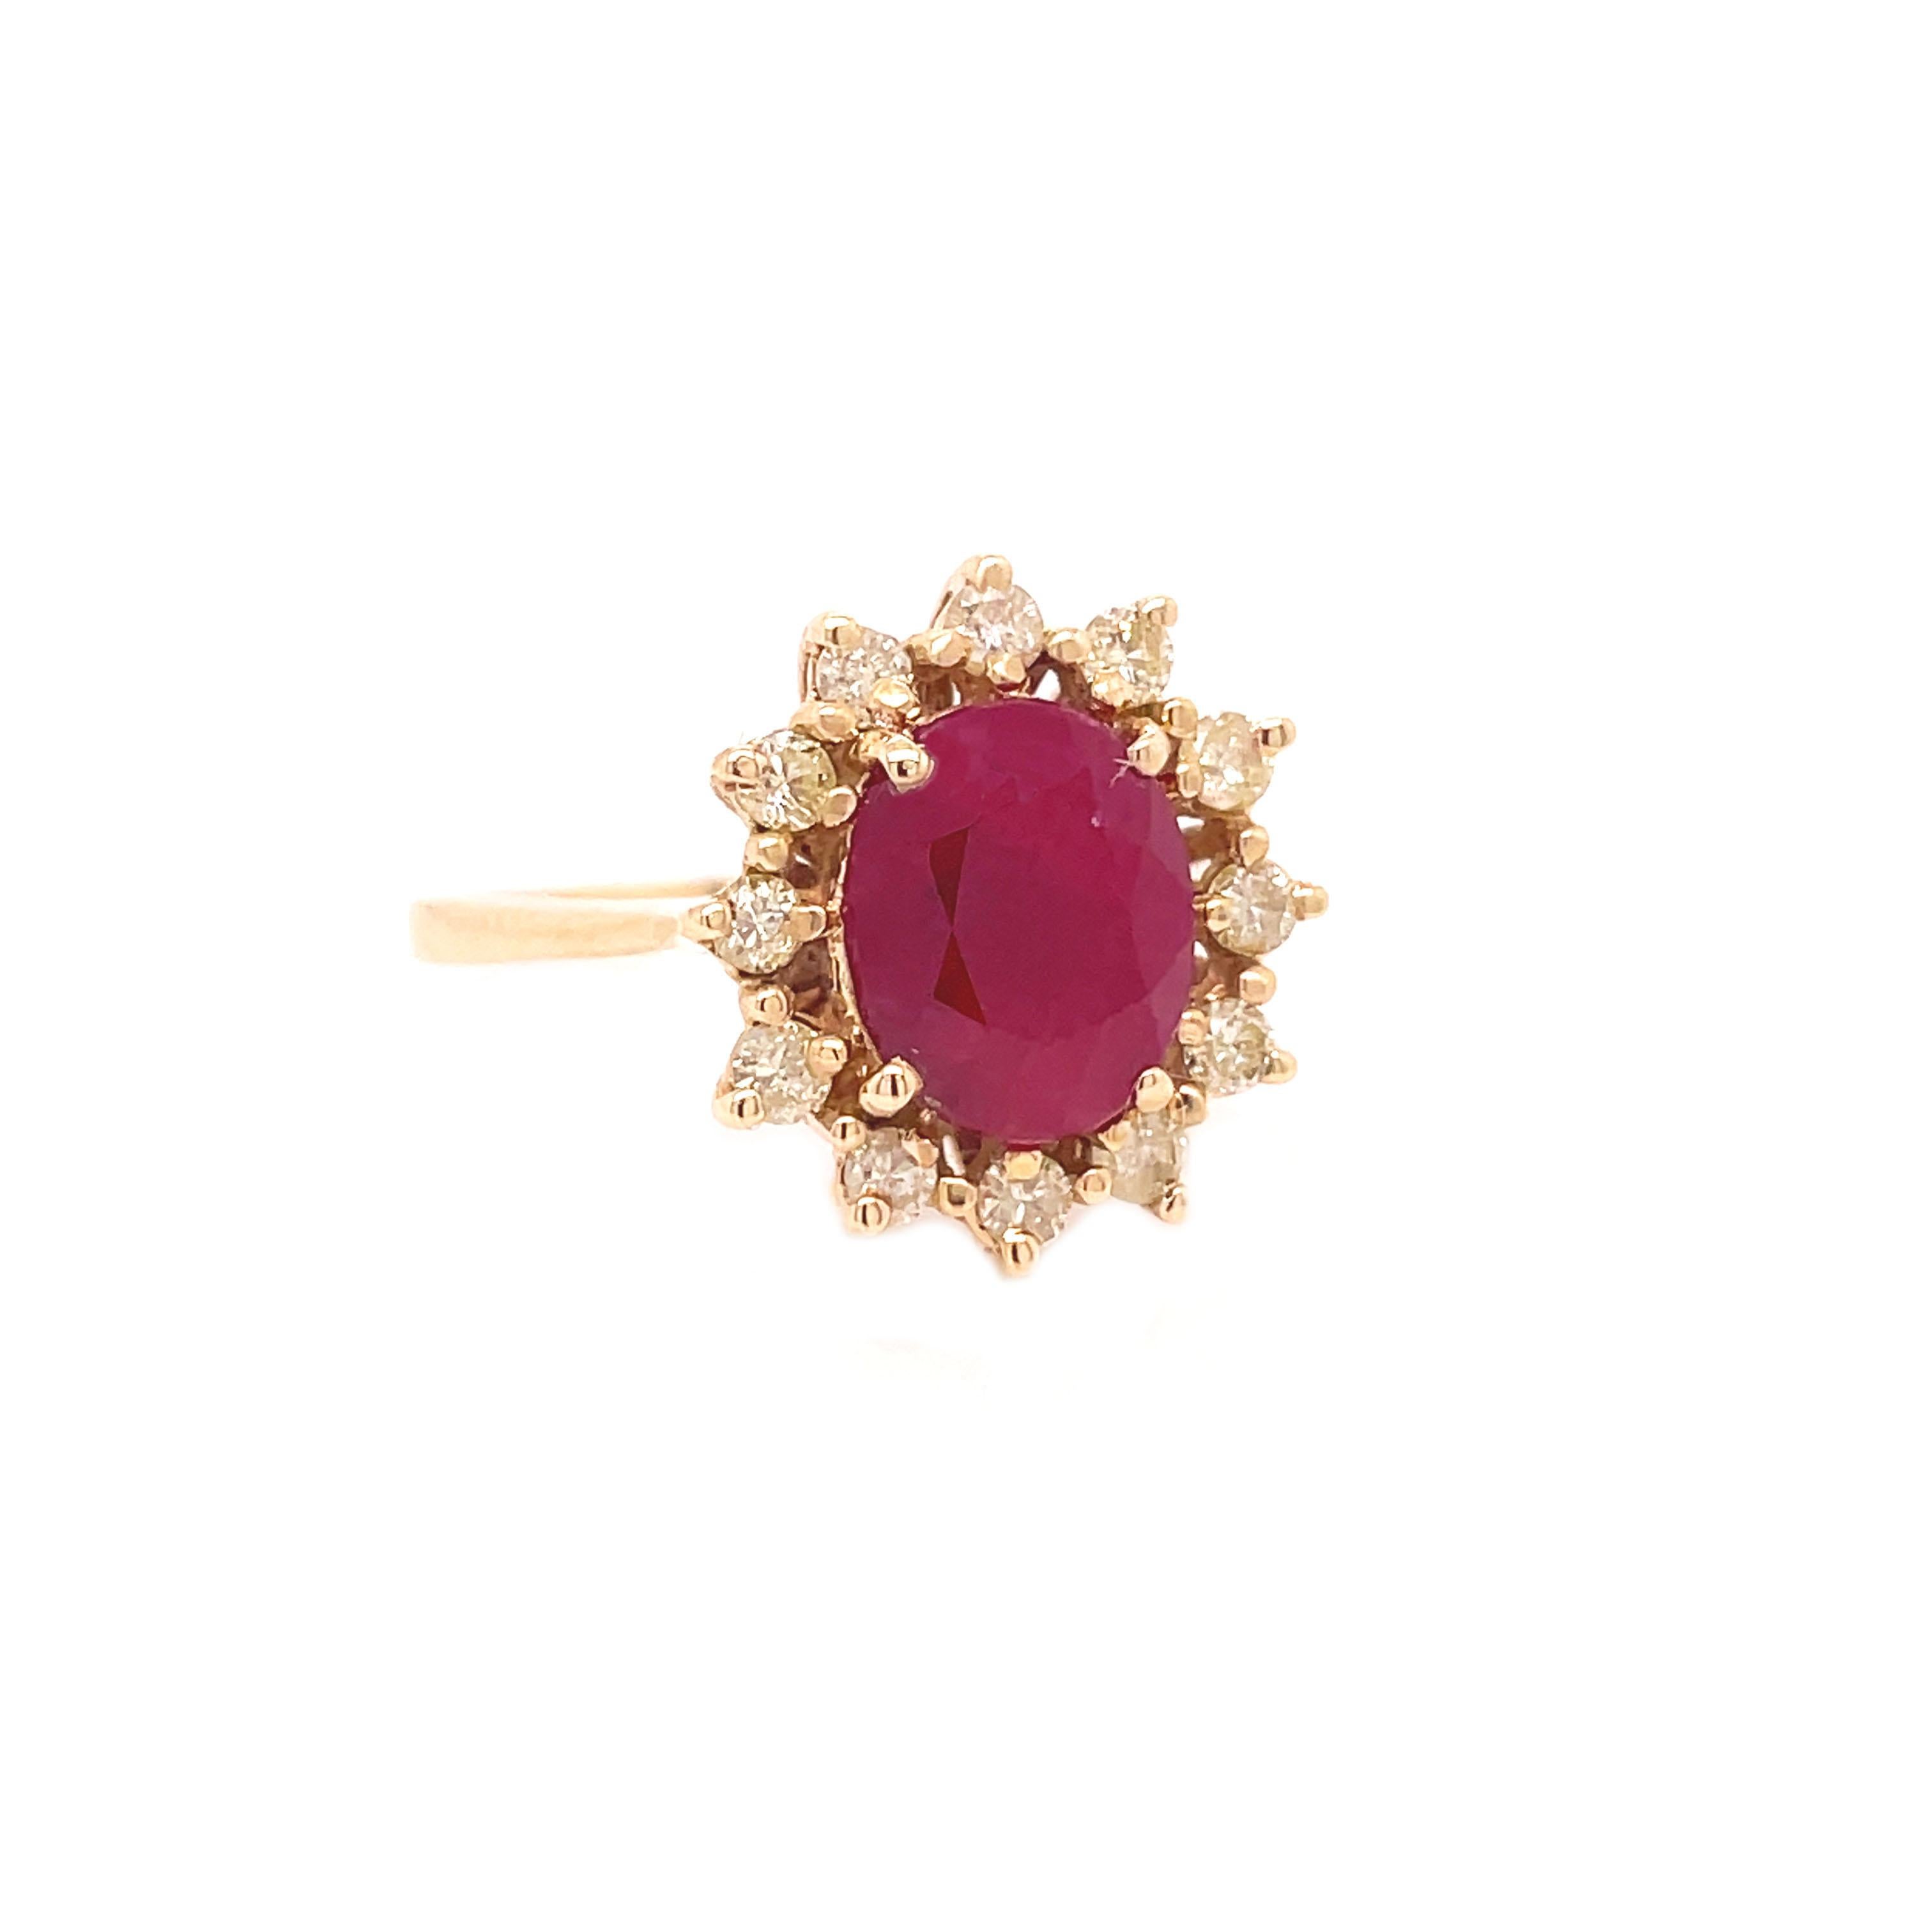 This is a beautiful ring set in 14K yellow gold that features a delicious 3+ carat vibrant ruby complimented by glittering light fancy yellow diamonds. The warm yellow gold metal paired with the rich and vibrant ruby creates a firey harmonious